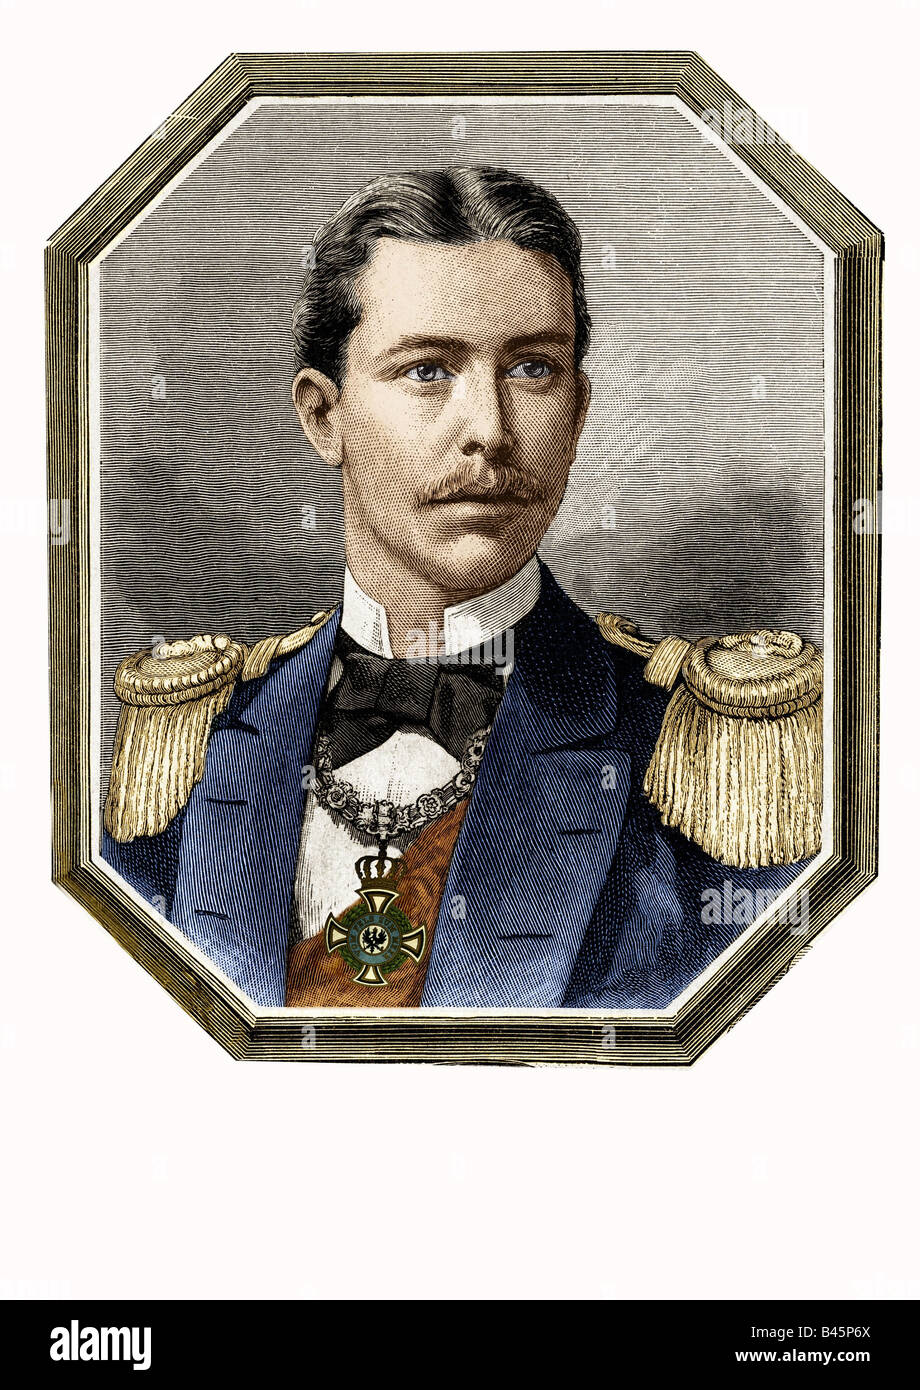 Heinrich, 14.8.1862 - 20.3.1929, Prince of Prussia, German admiral, portrait, engraving 1887, Stock Photo